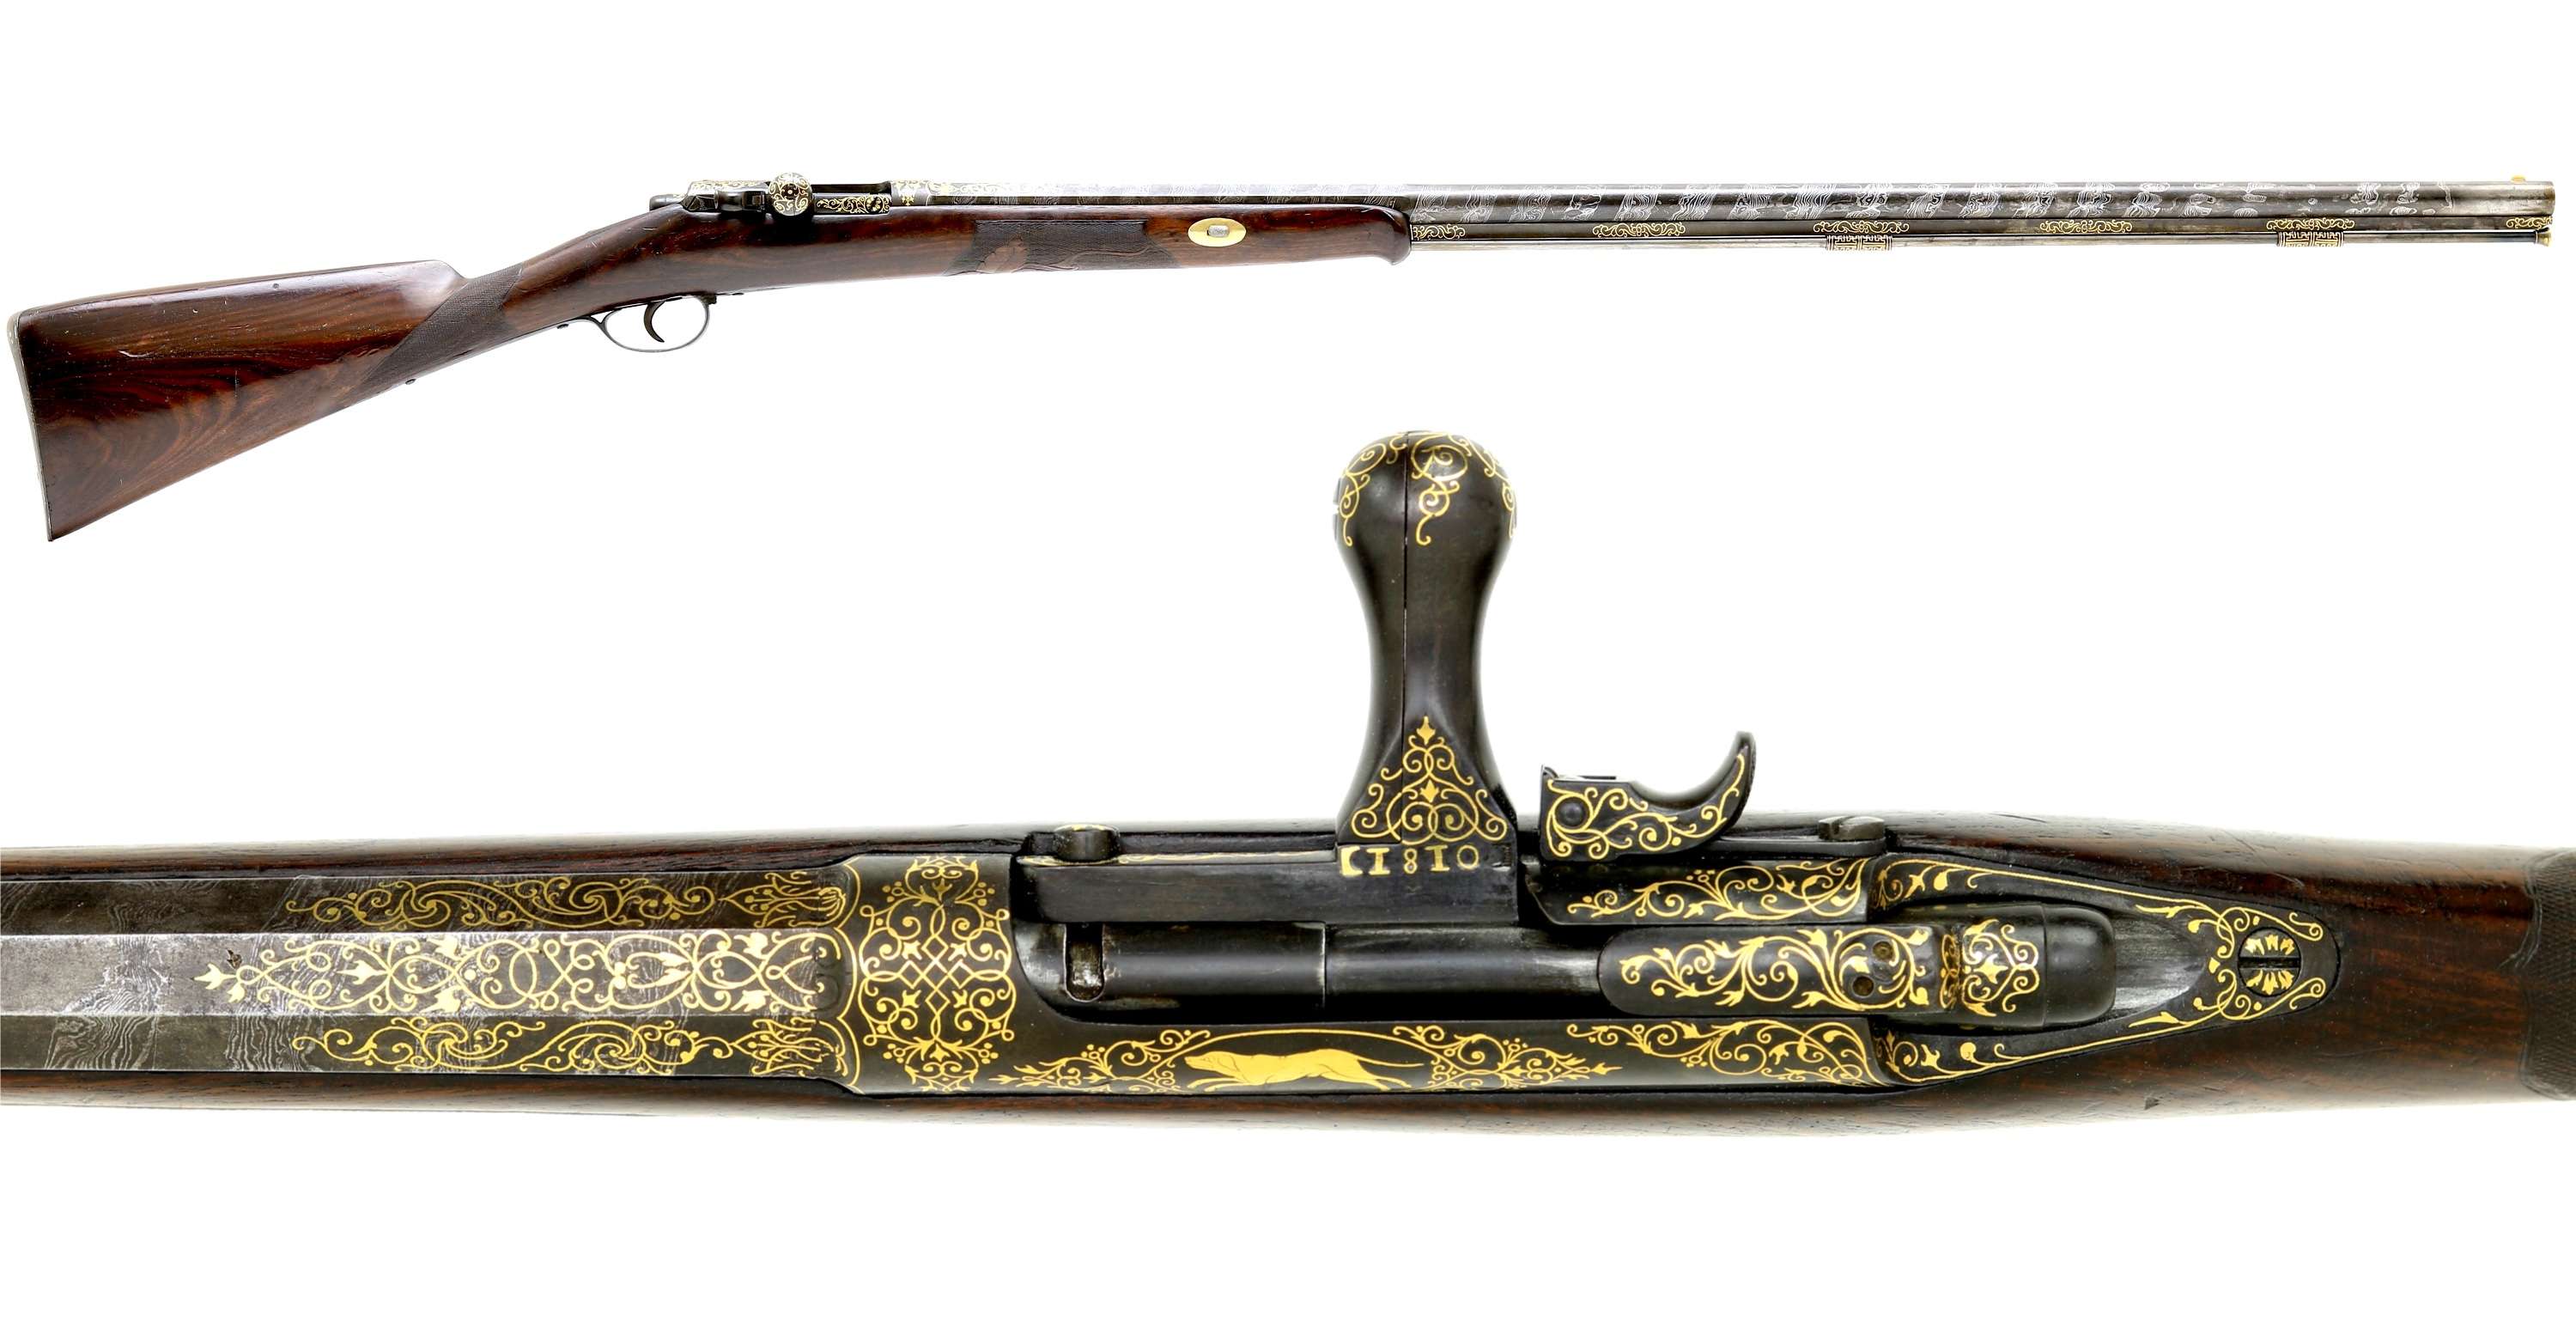 Dutch colonial sporting gun, made in Indonesia and based on Beaumont technology